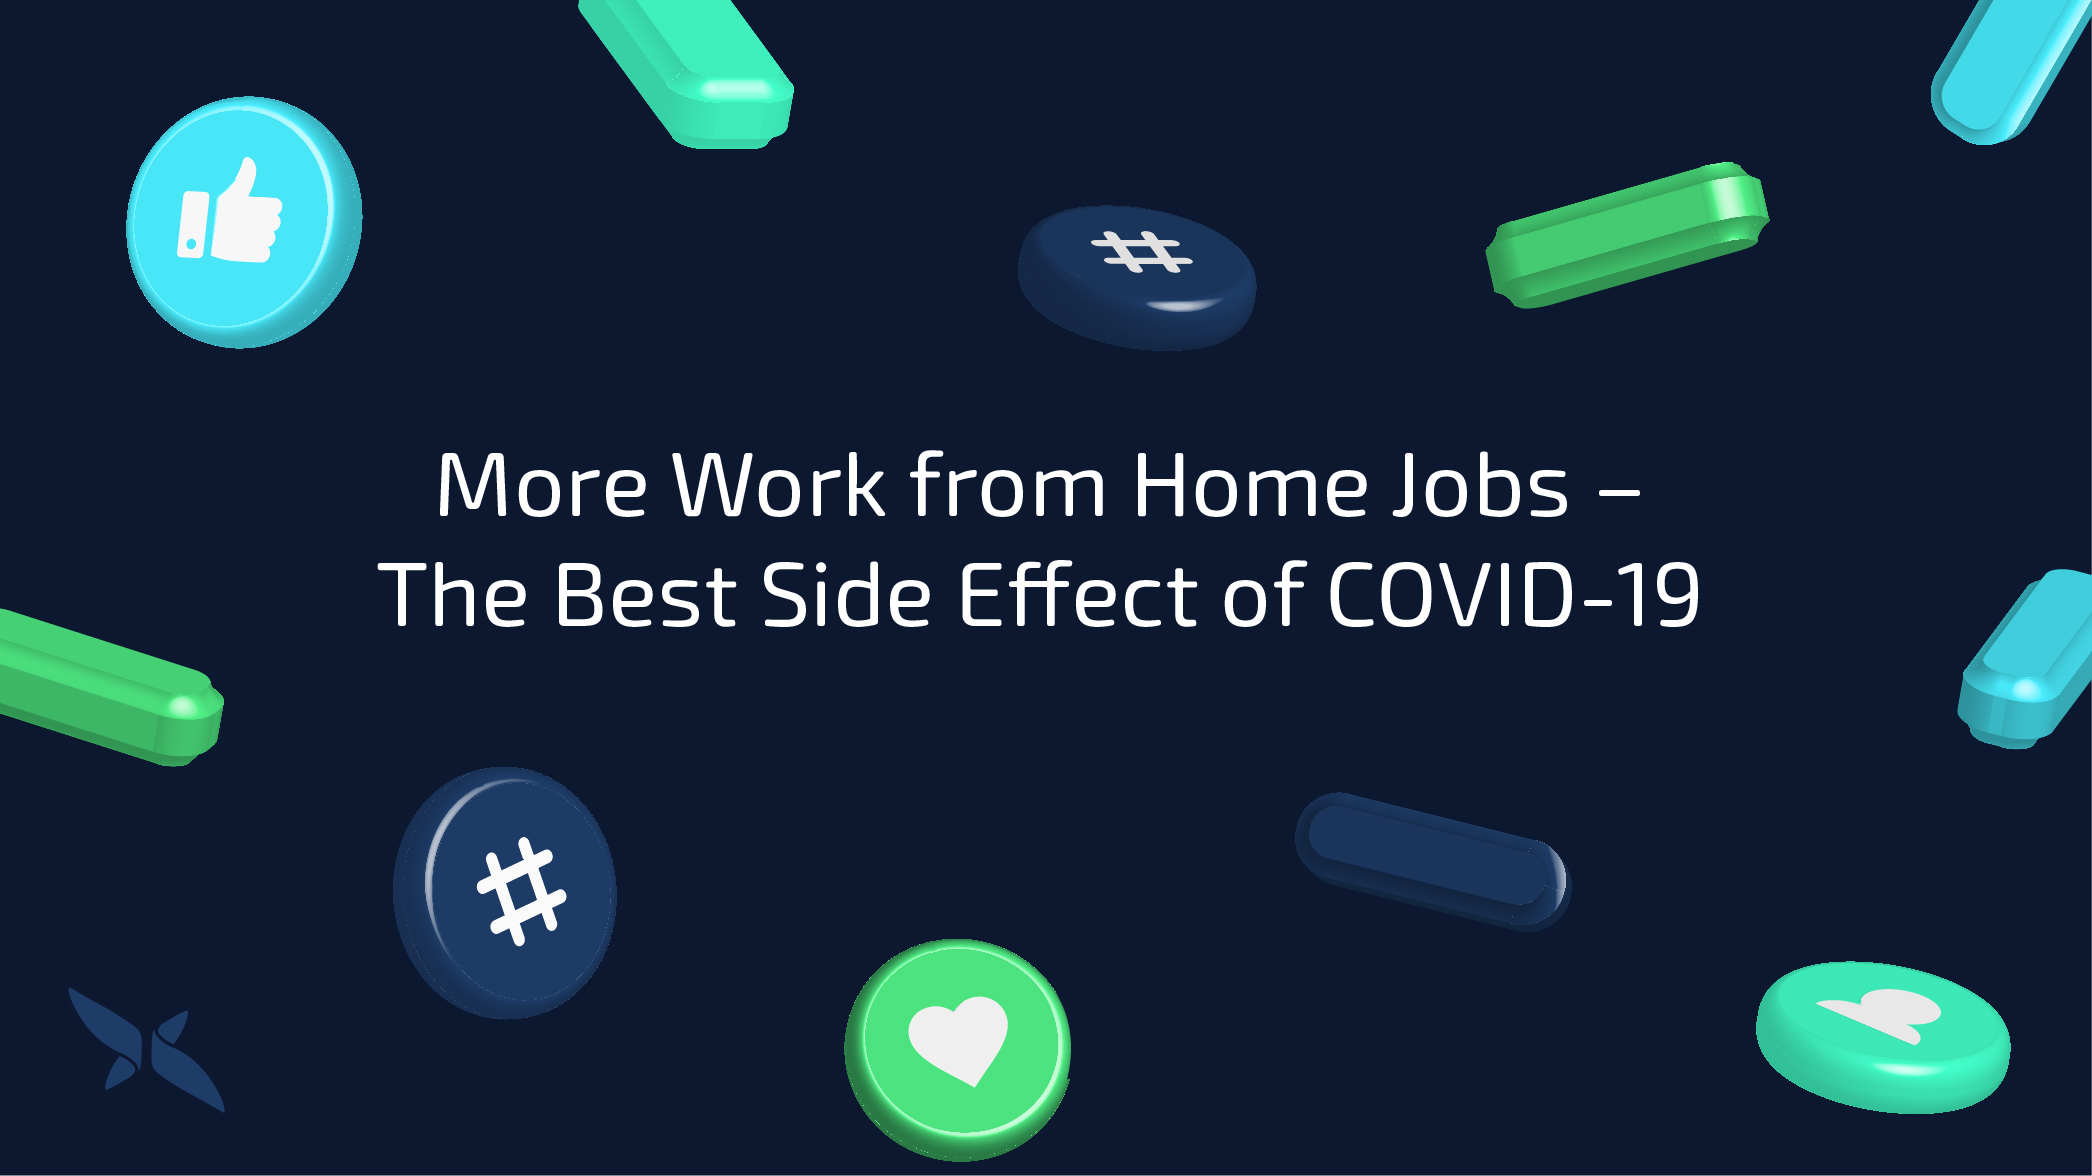 More Work from Home Jobs – The Best Side Effect of COVID-19